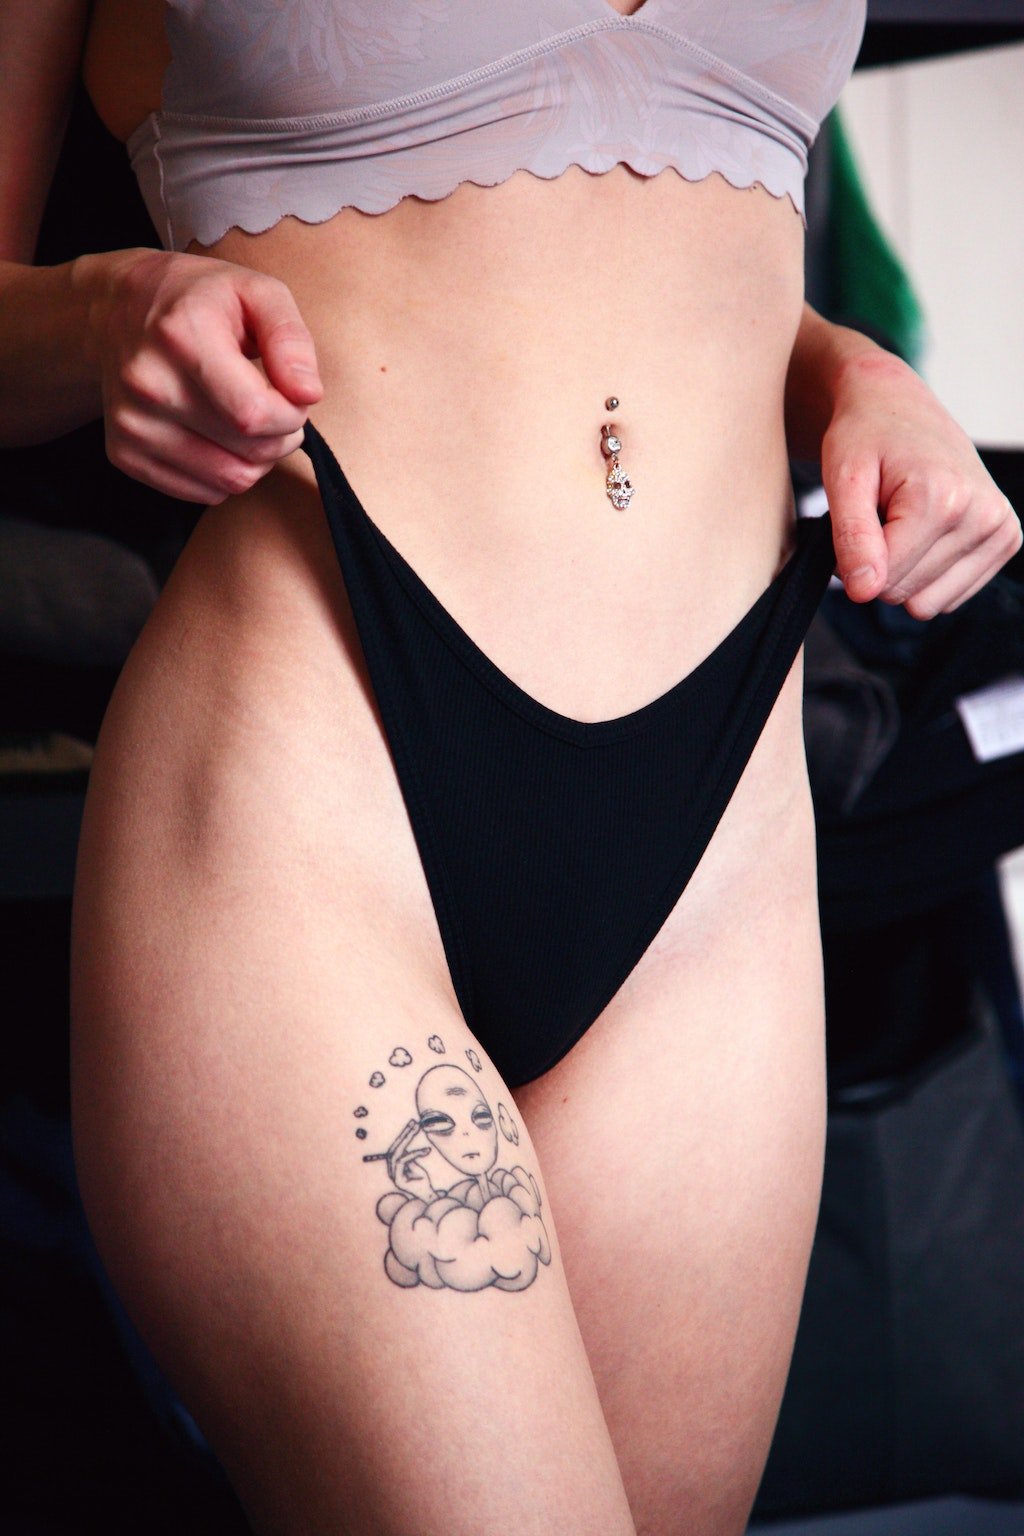 Woman with Tattoo and Belly Piercing